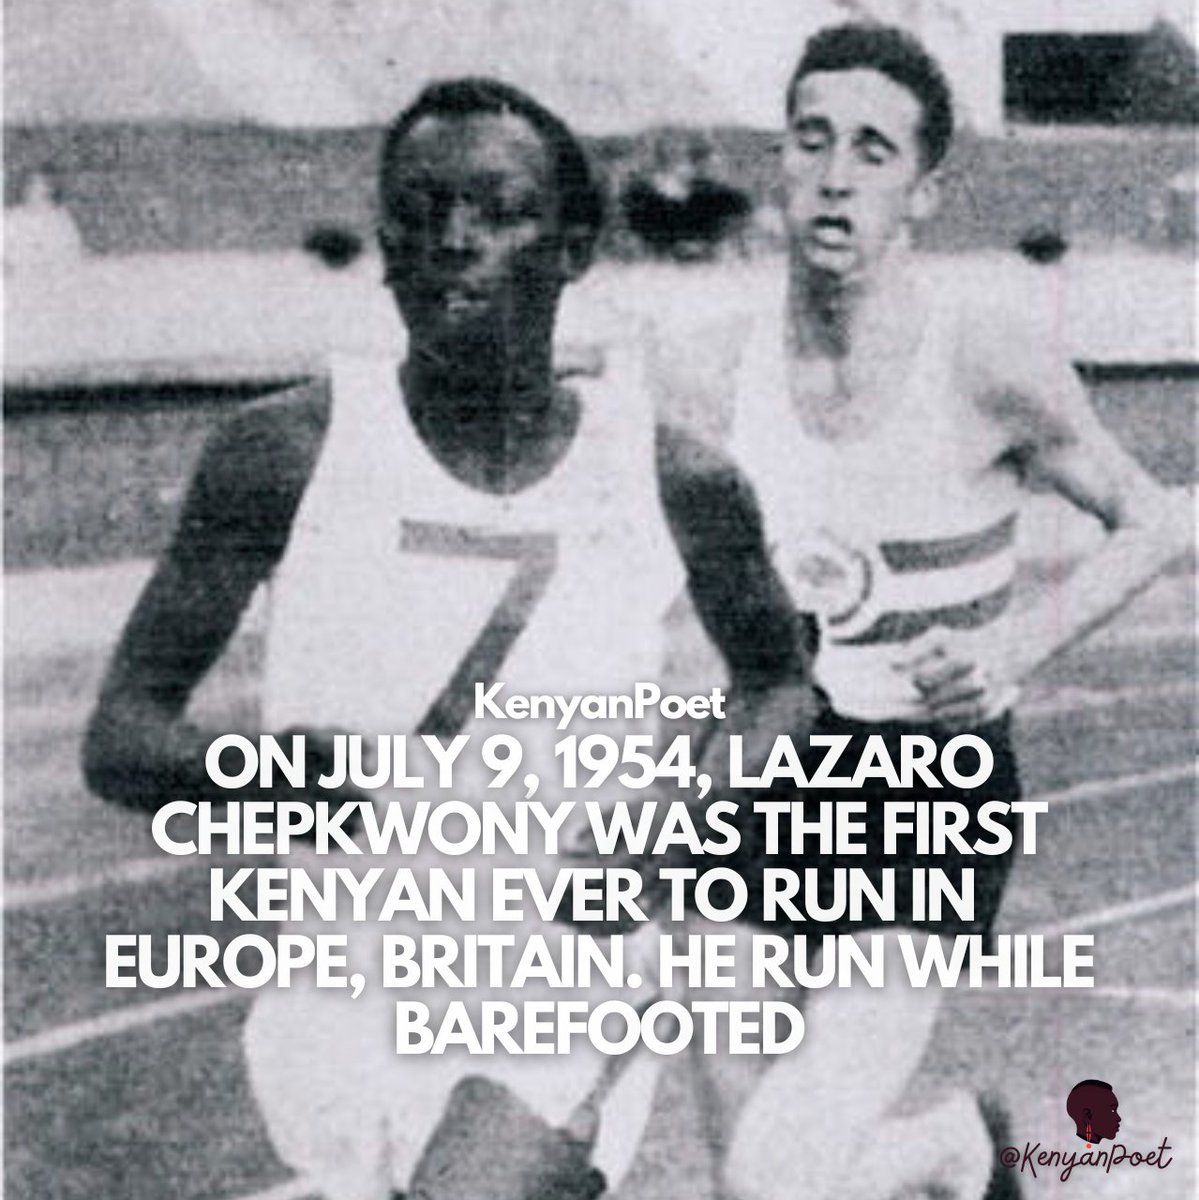 On July 9, 1954, Lazaro Chepkwony made history as the first Kenyan to compete in Europe, running barefoot in London's AAA Six Miles race. Chepkwony led the field multiple times before dropping out, due to an injury. Find more stories on kenyanpoet.com